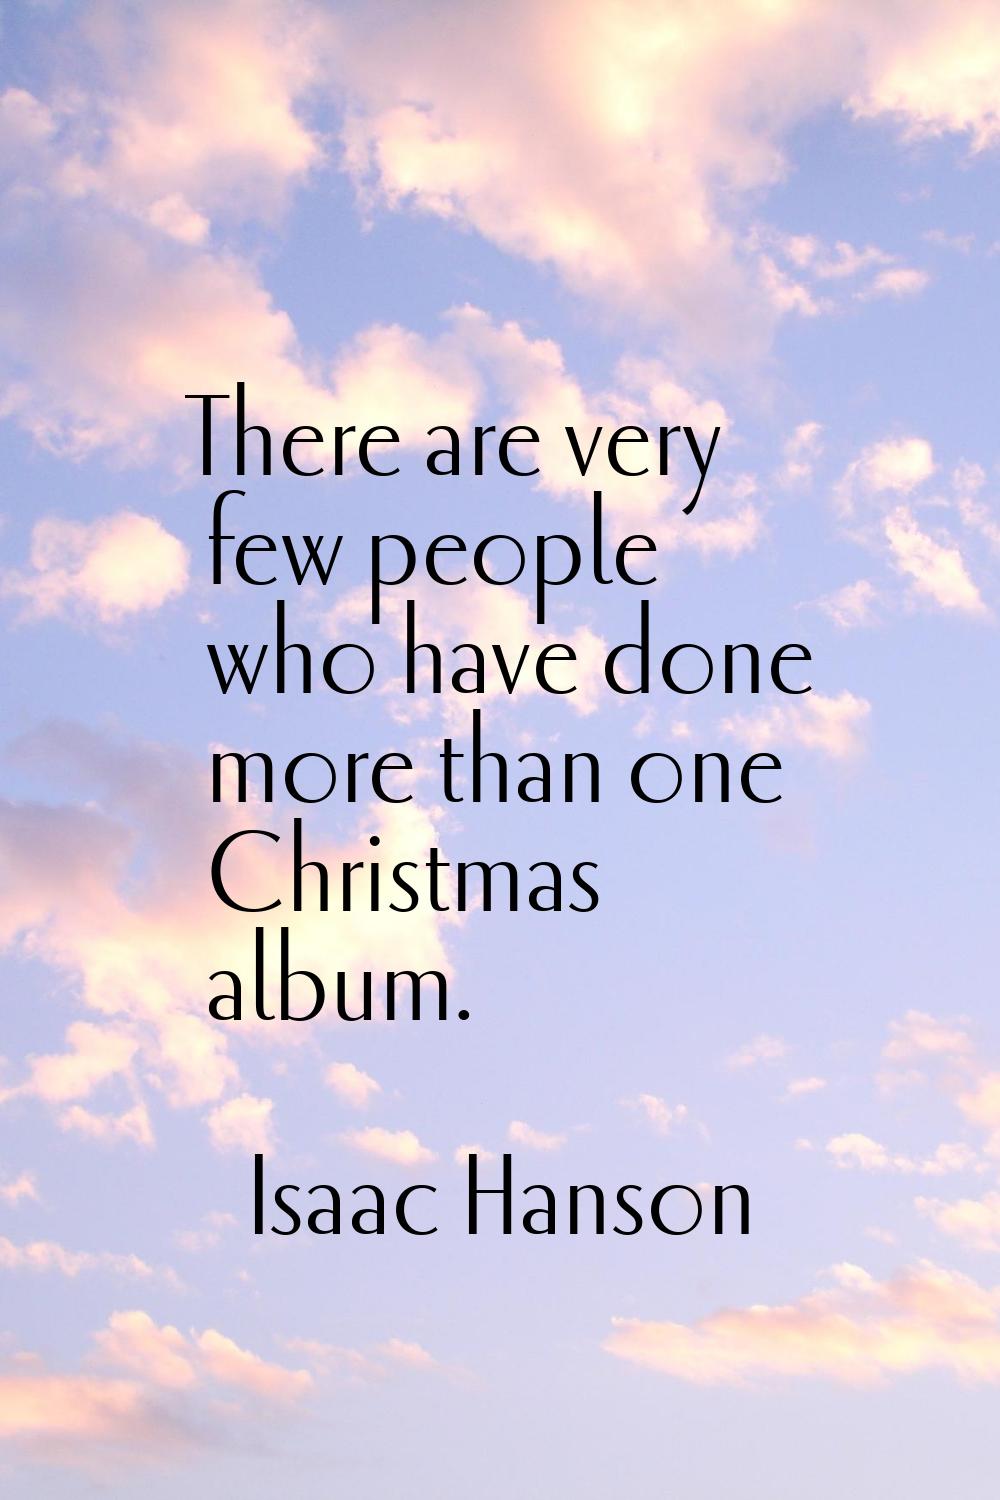 There are very few people who have done more than one Christmas album.